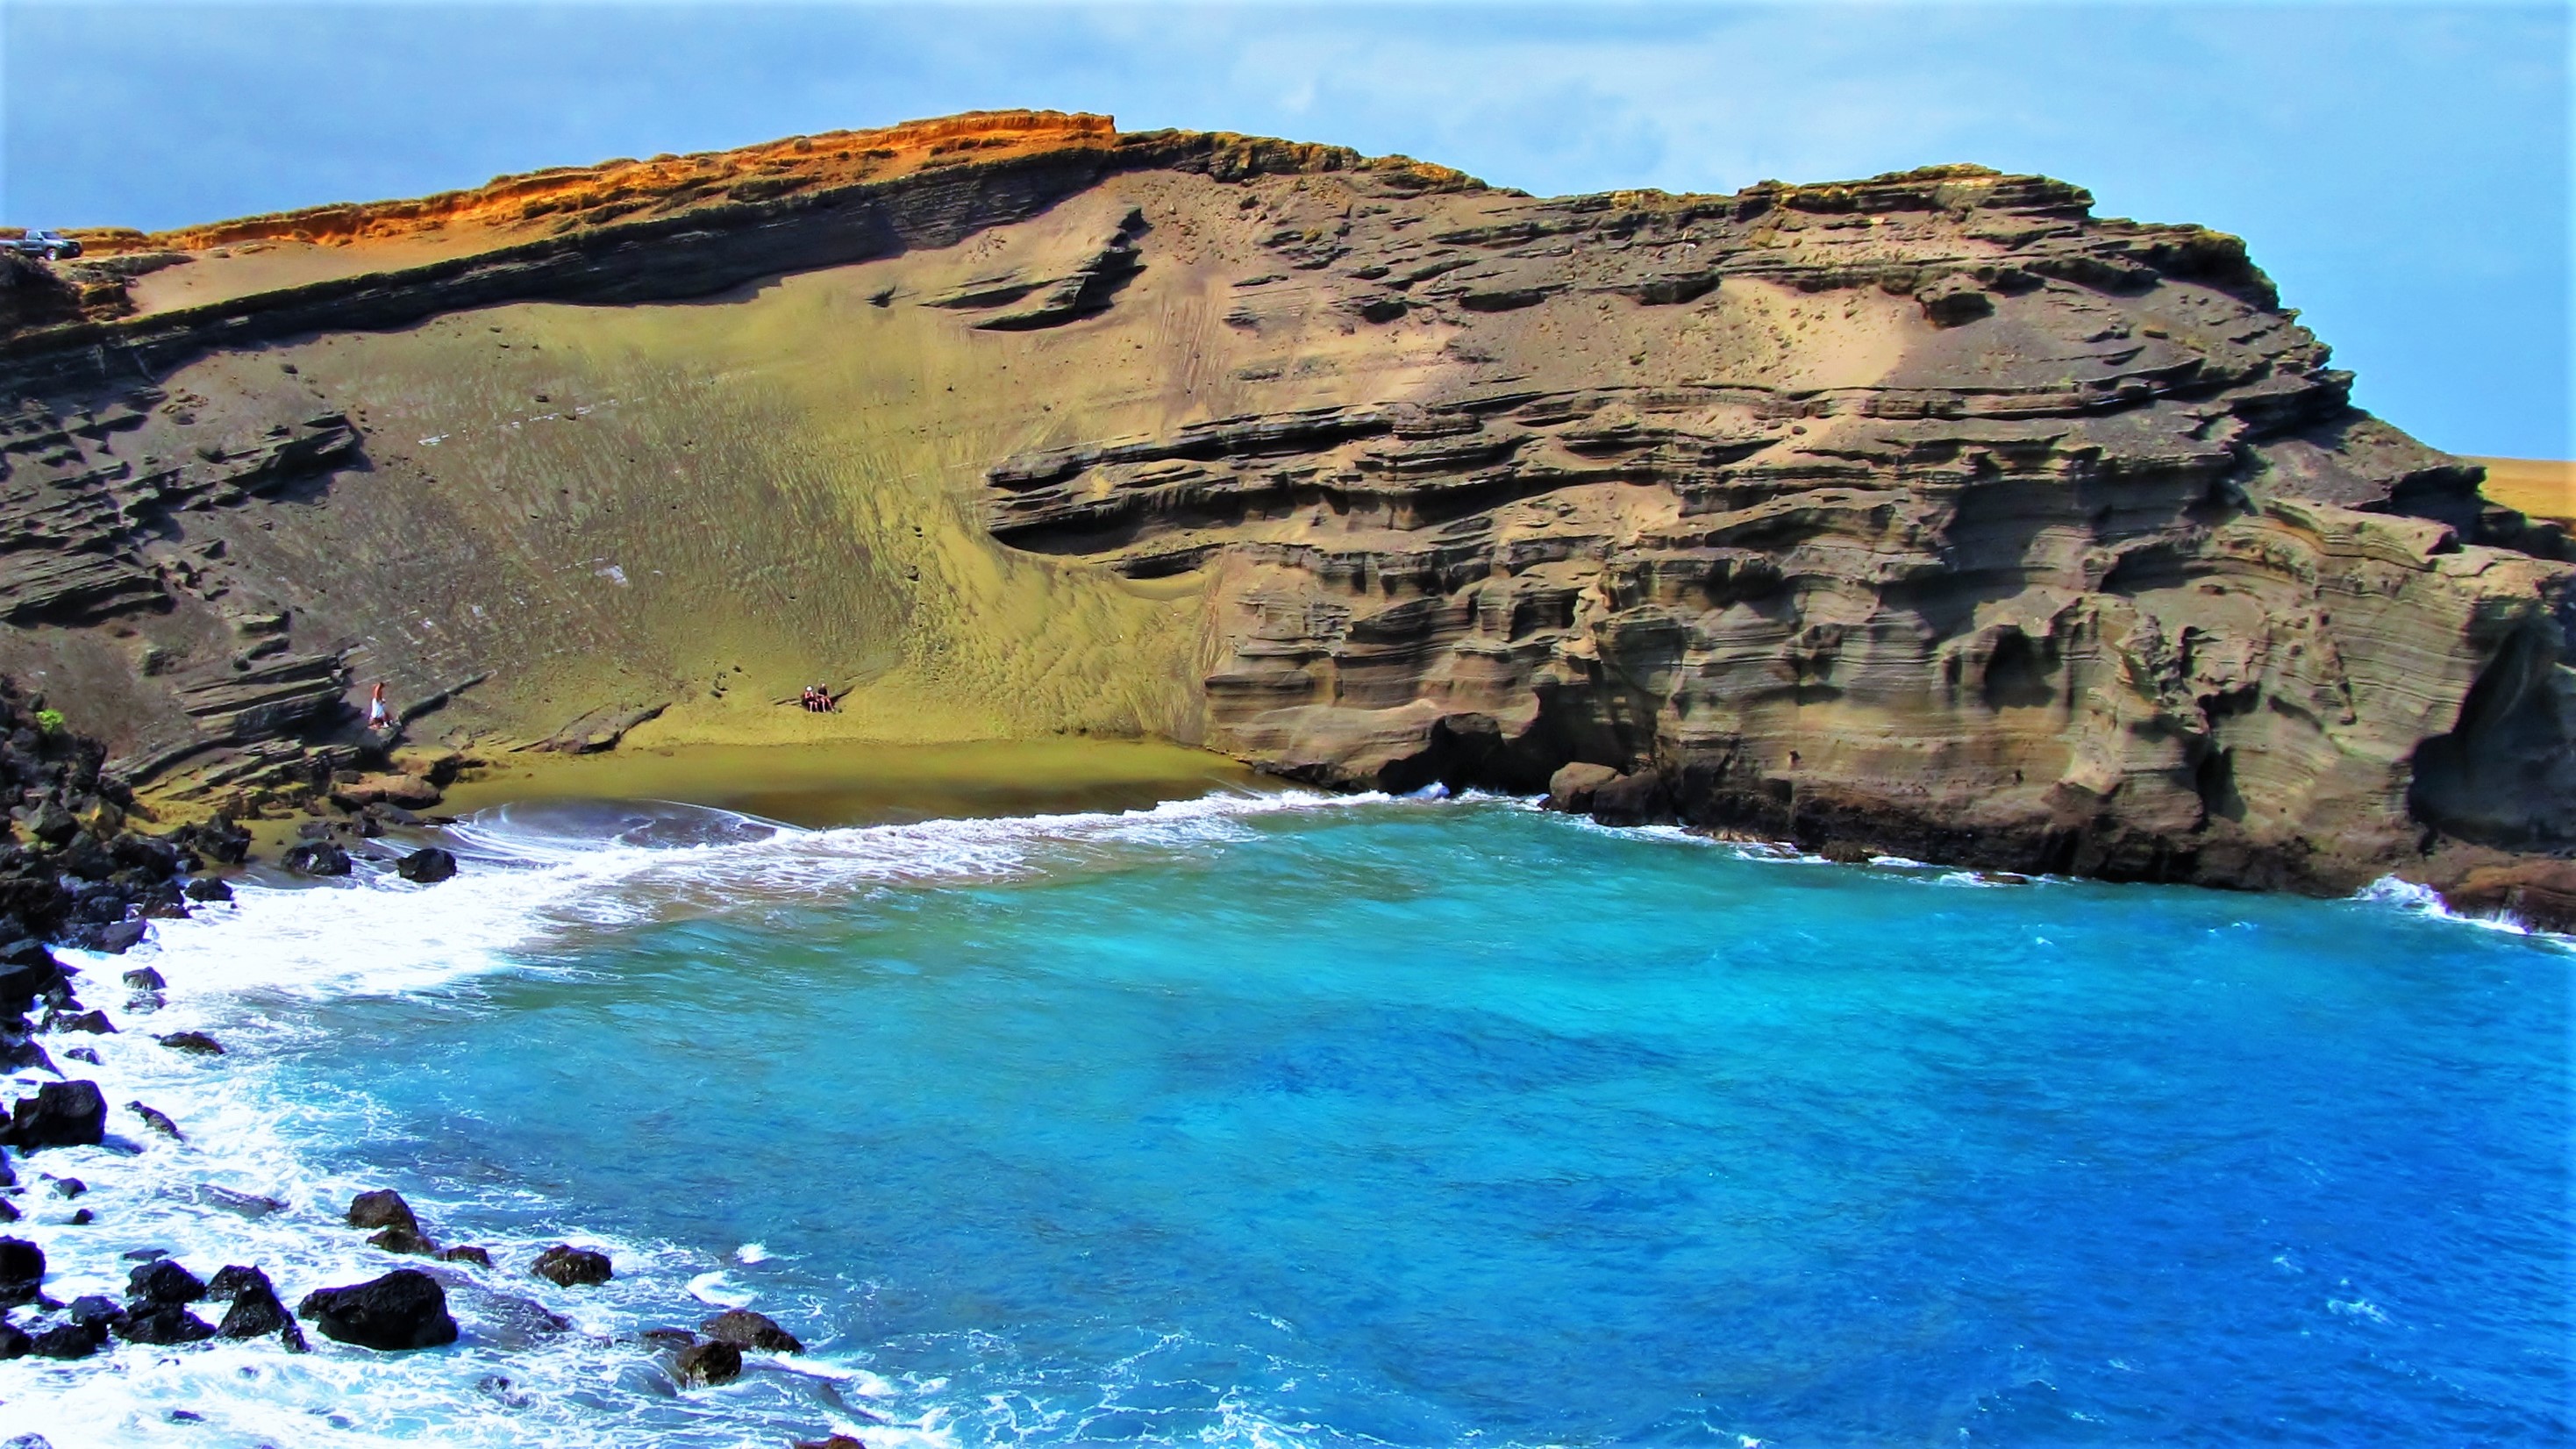 Papakolea Green Sand Beach - one of many unique Hawaii attractions